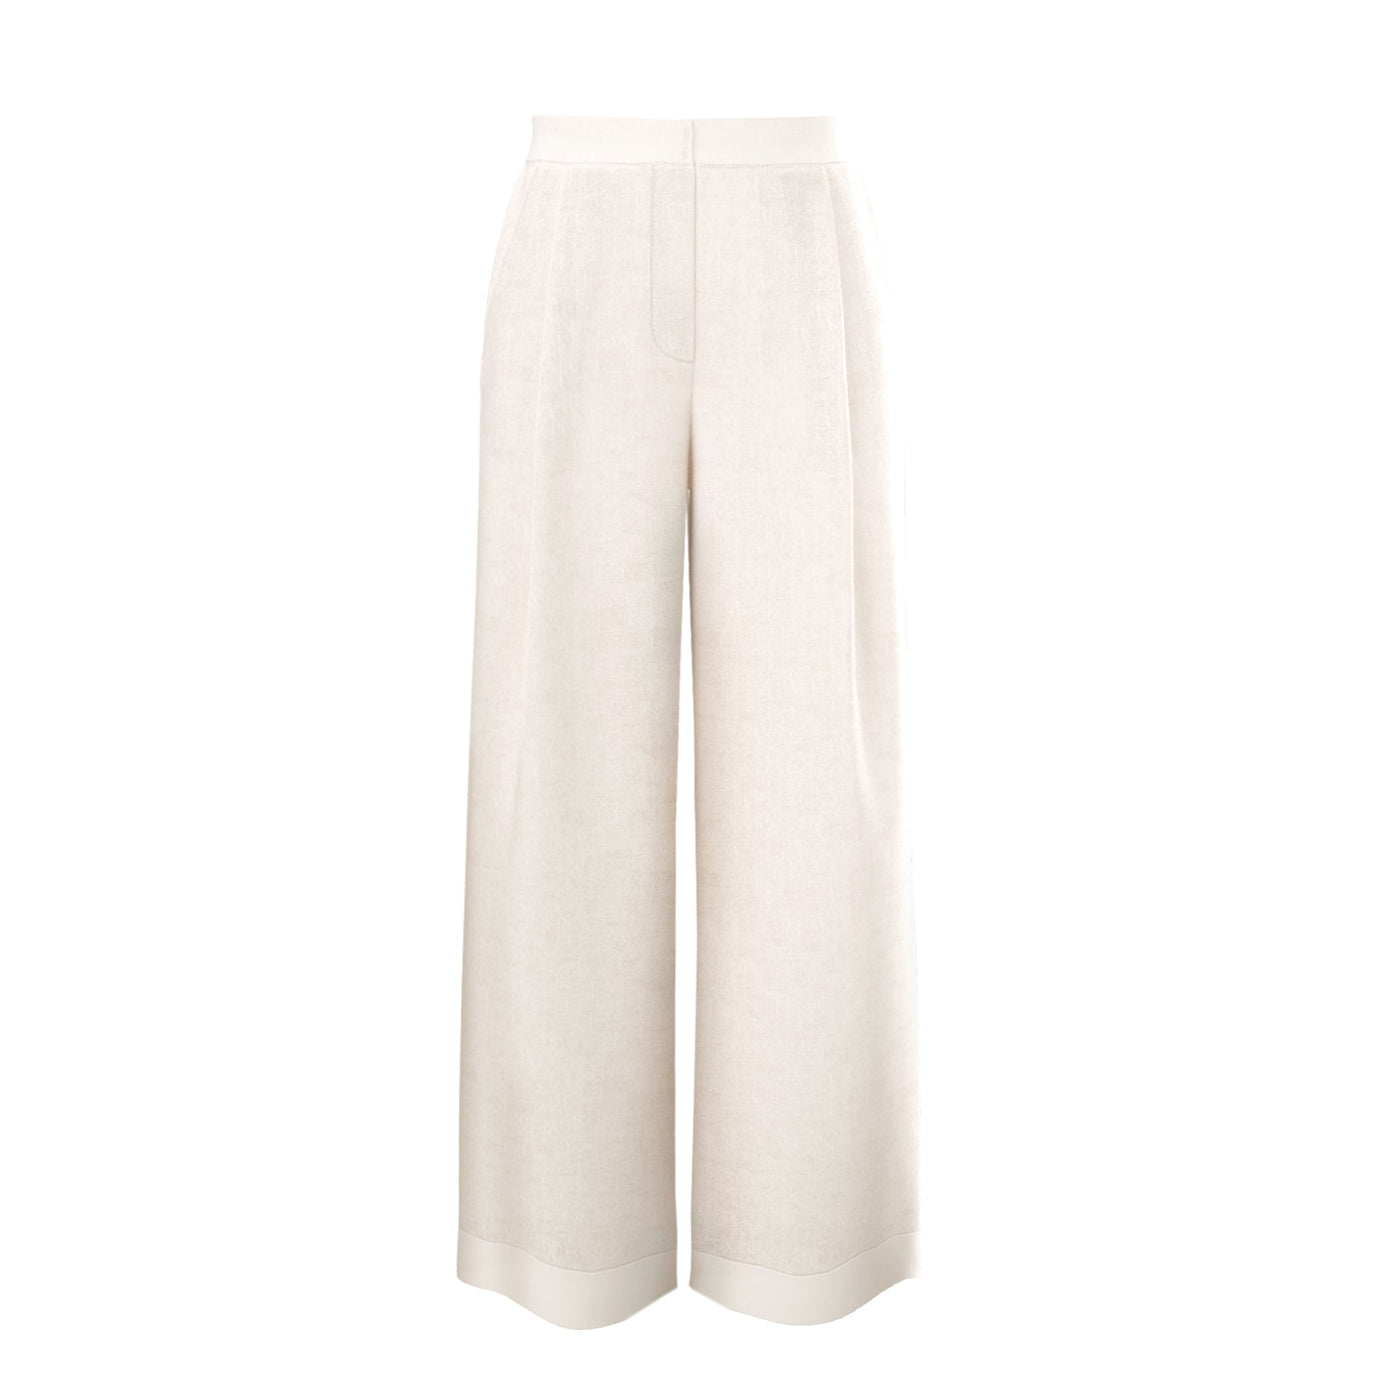 Lilly Pilly Collection Oli pants made from 100% Organic linen in Ivory, as 3D model showing back view